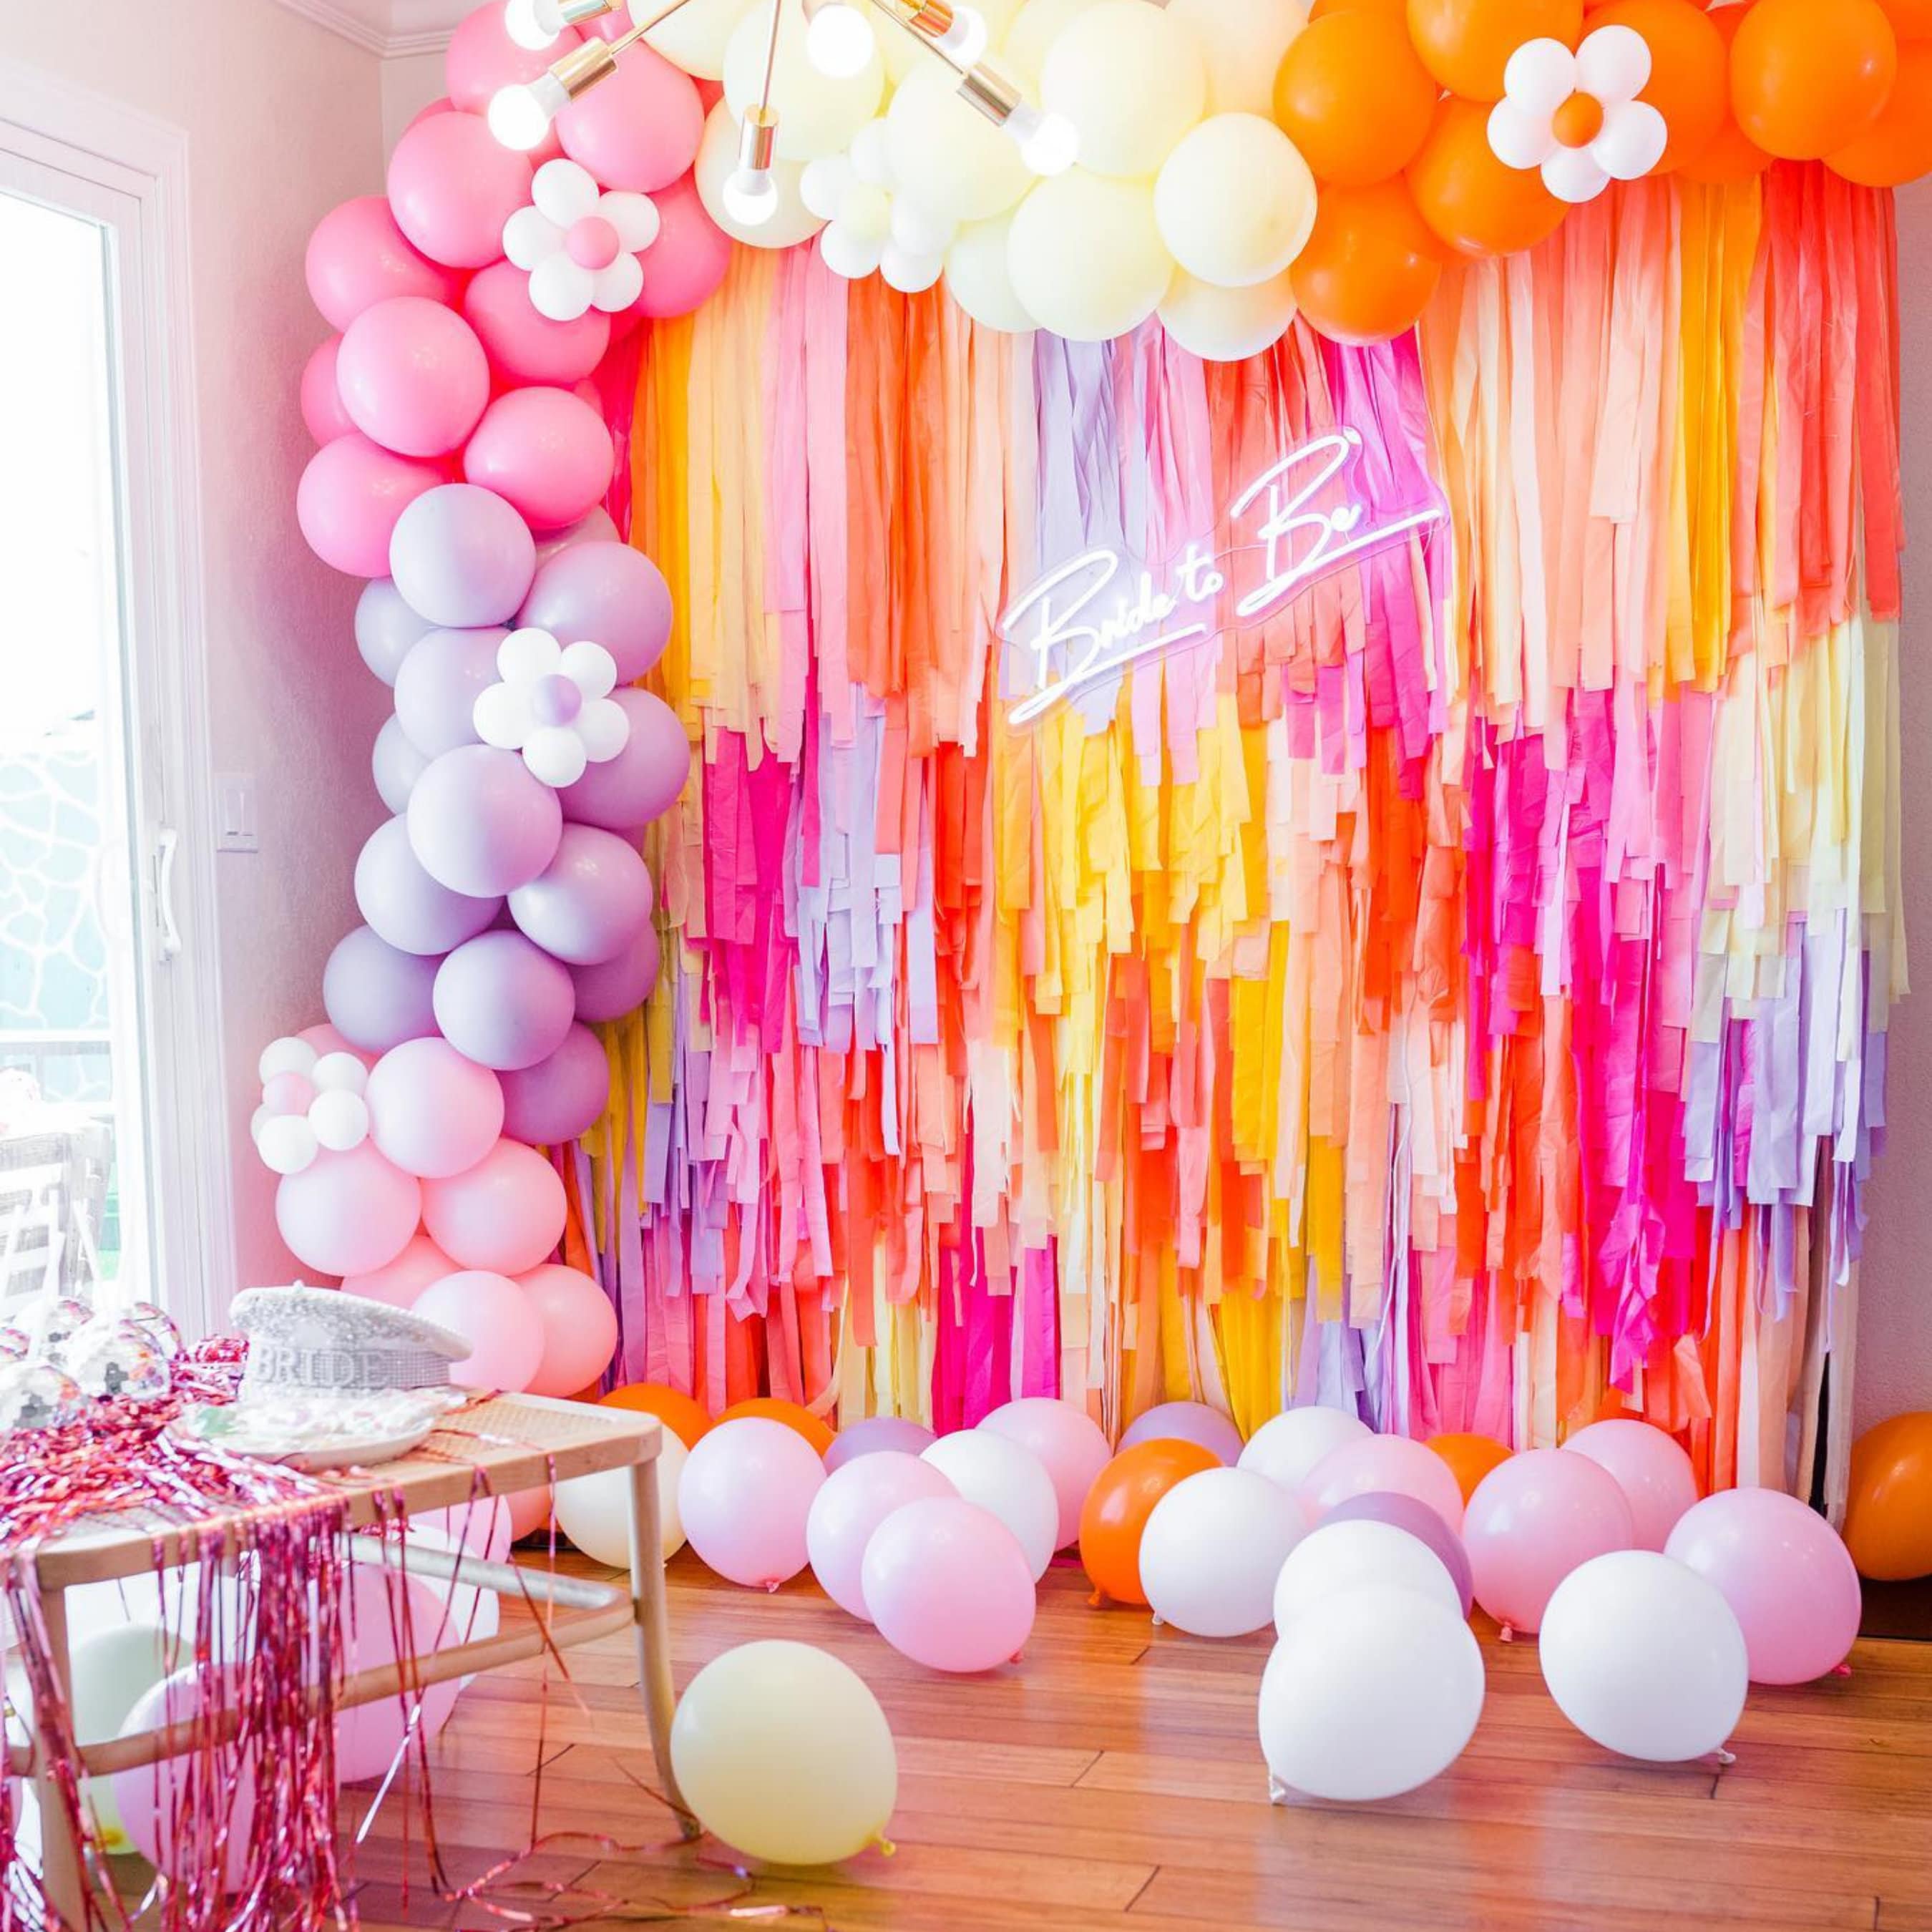 100 Decorating With Streamer ideas  streamers, streamer decorations, party  decorations